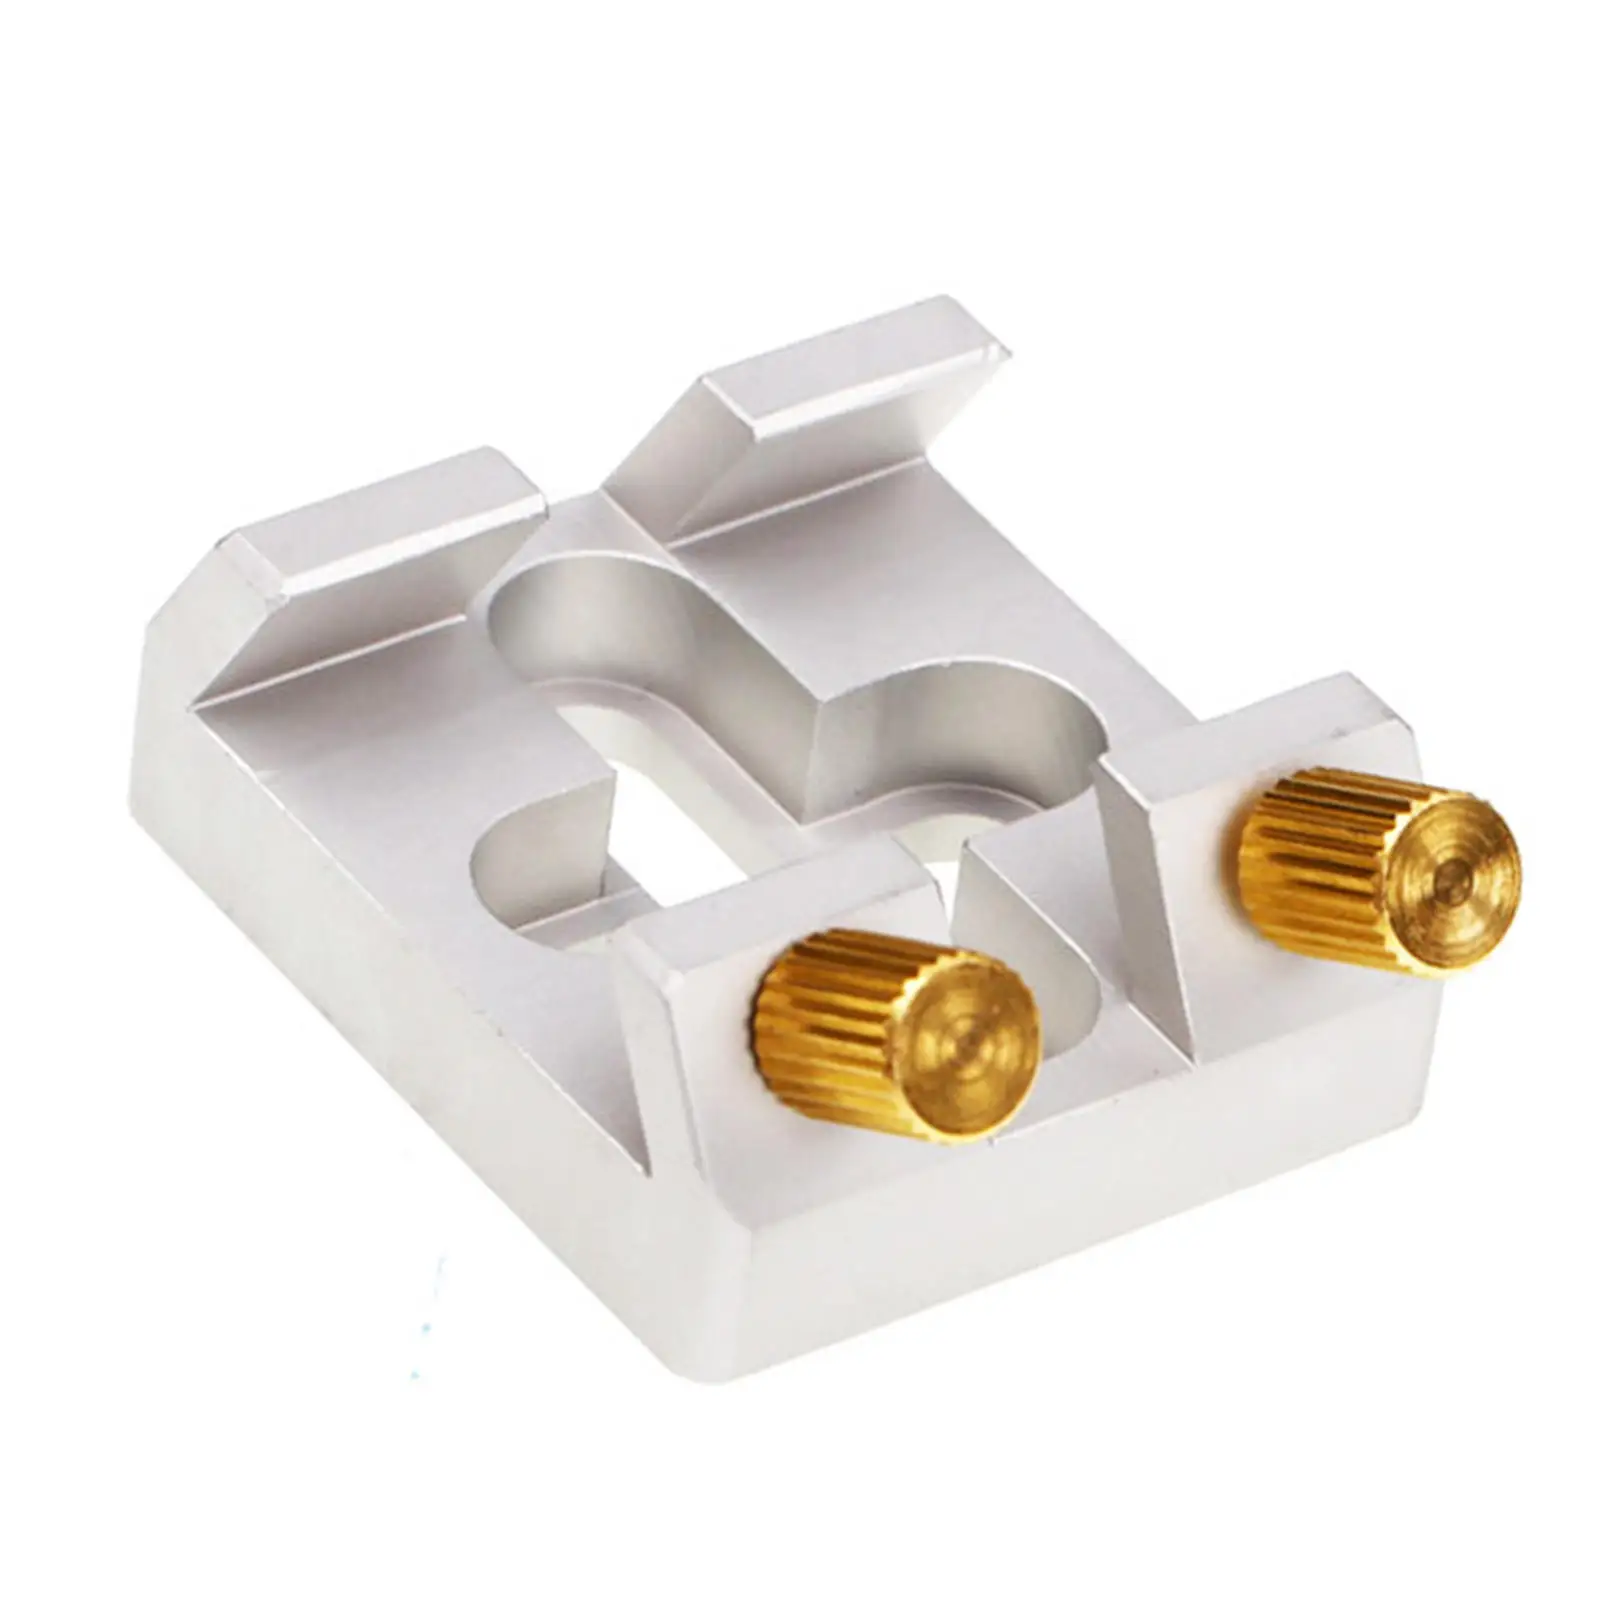 Universal Dovetail Base for Finder Scope Installation of Finder Scope with Screw Telescope Dovetail Slot Plate Accessories Parts